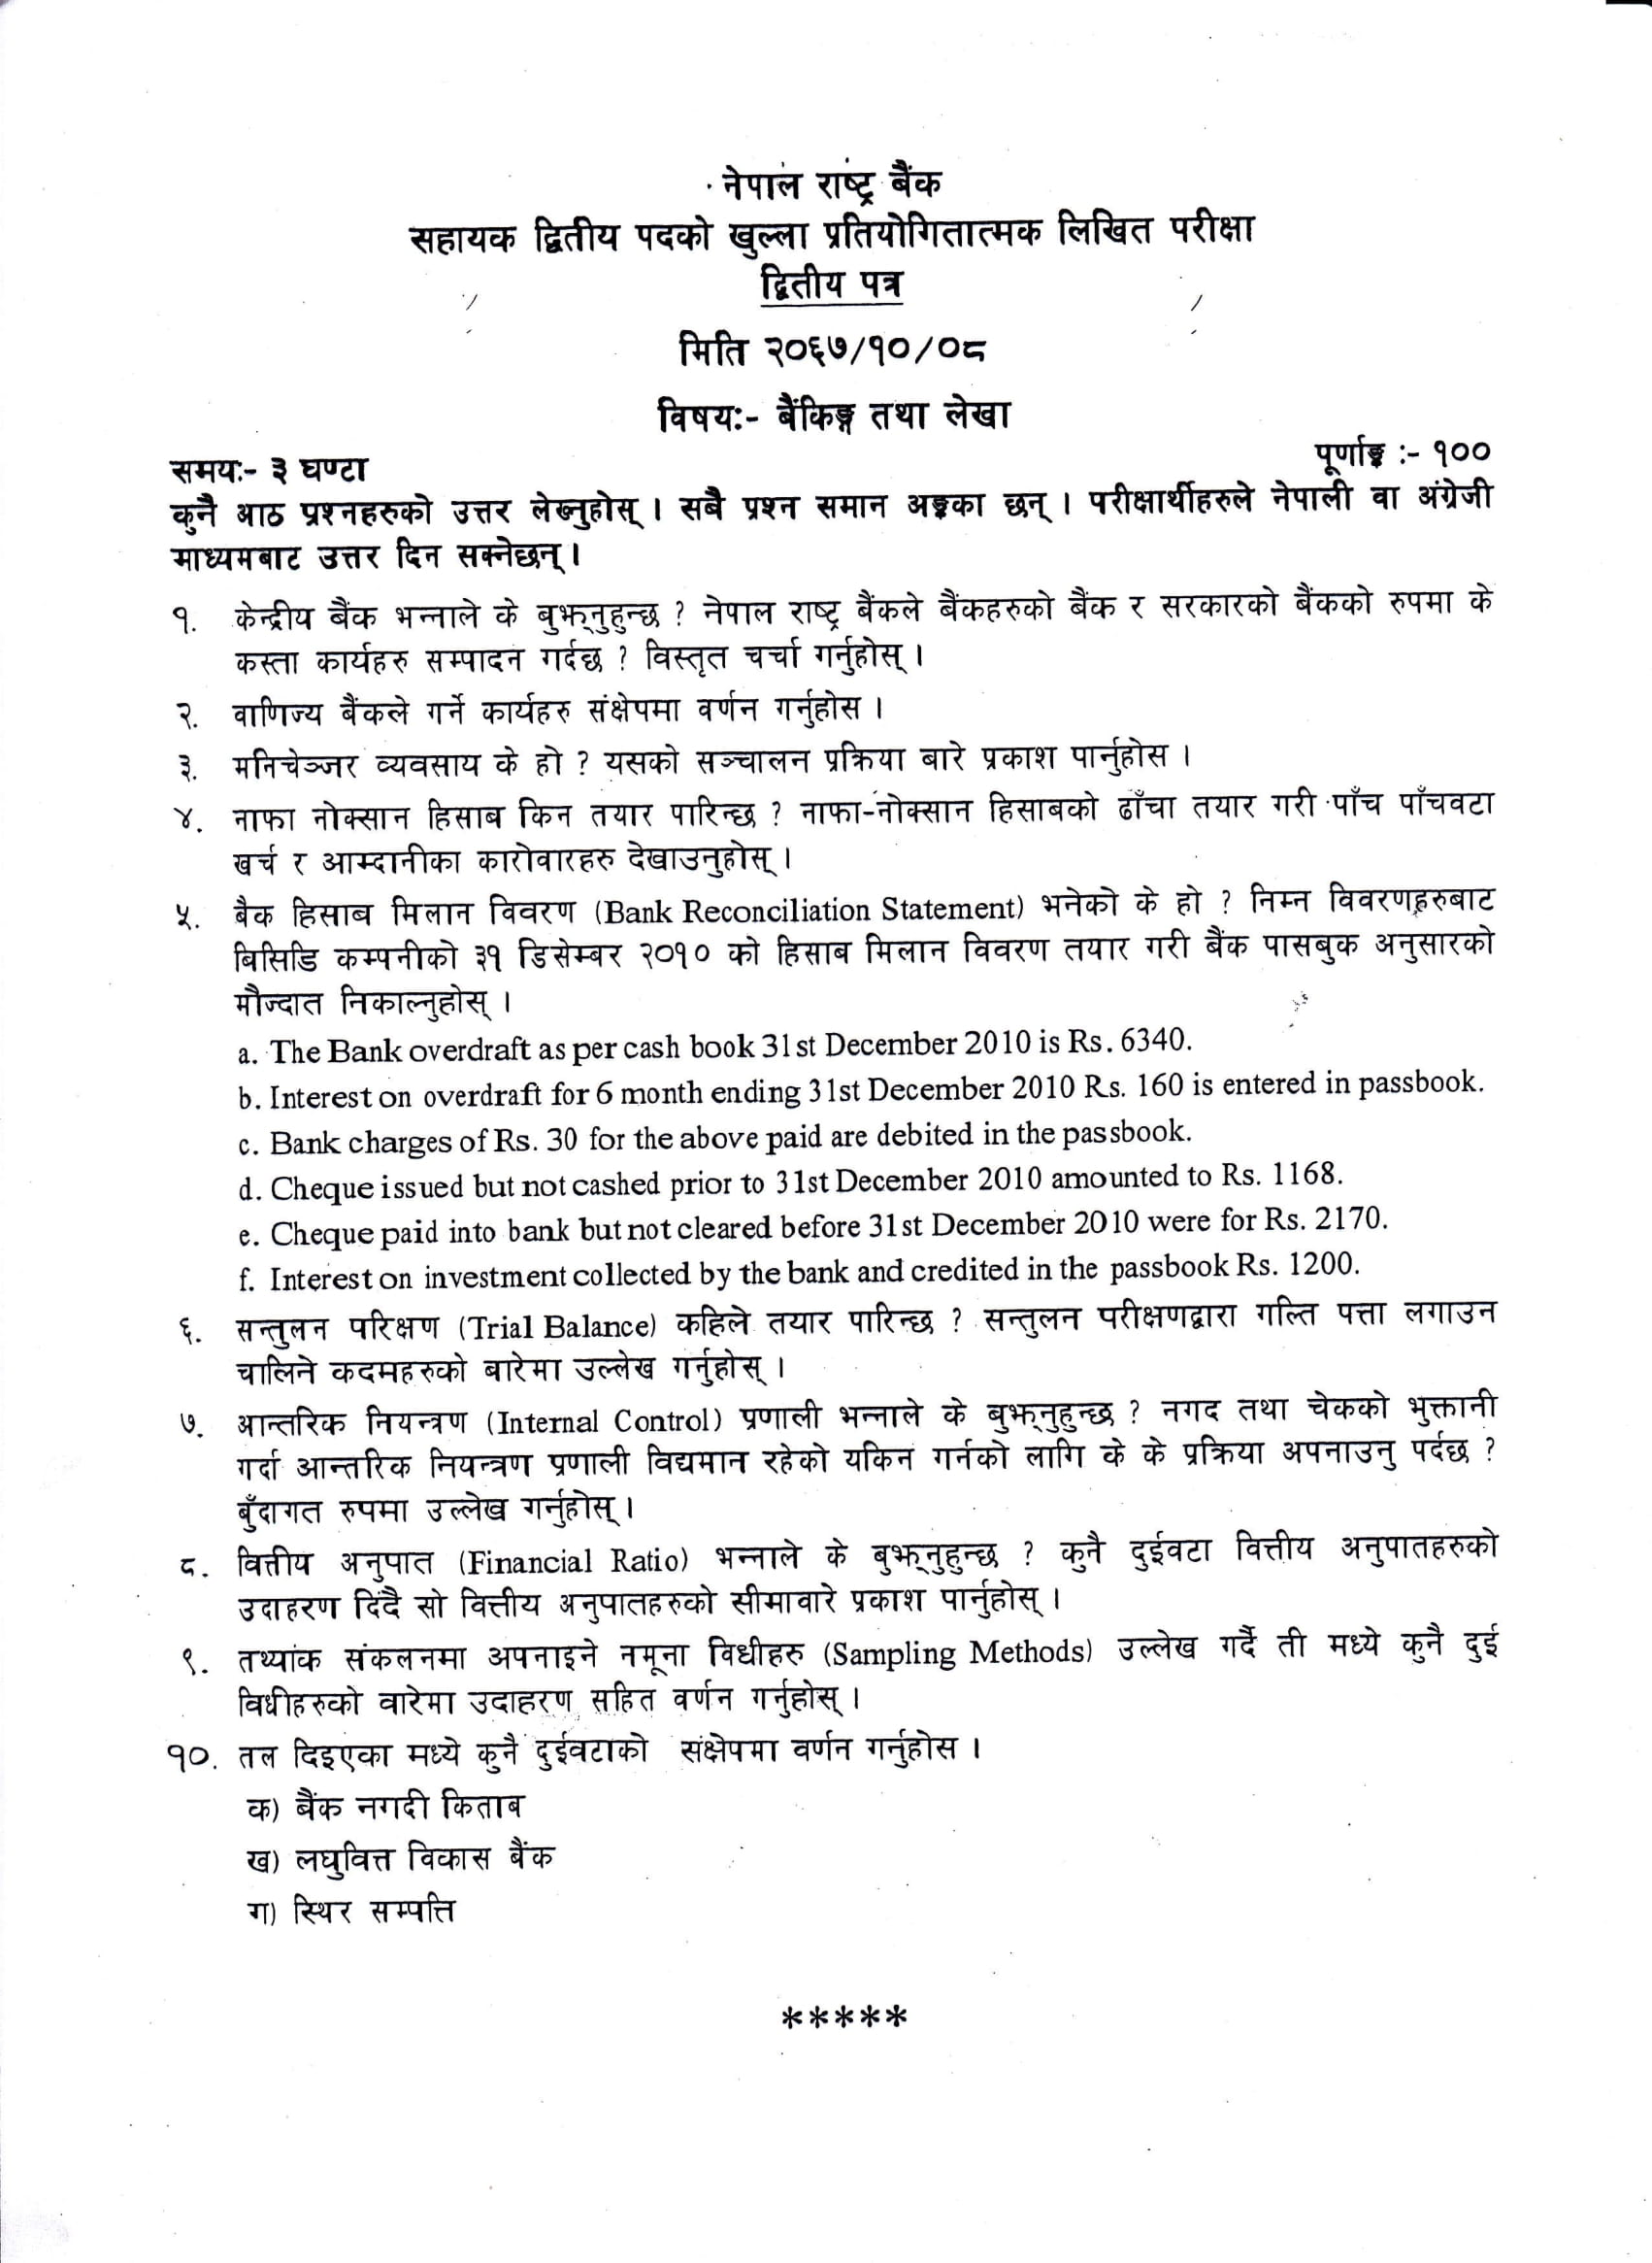 Assistant Second - Sahayek Ditiye Nepal Rastra Bank (NRB) - Recent Papers And Model Questions